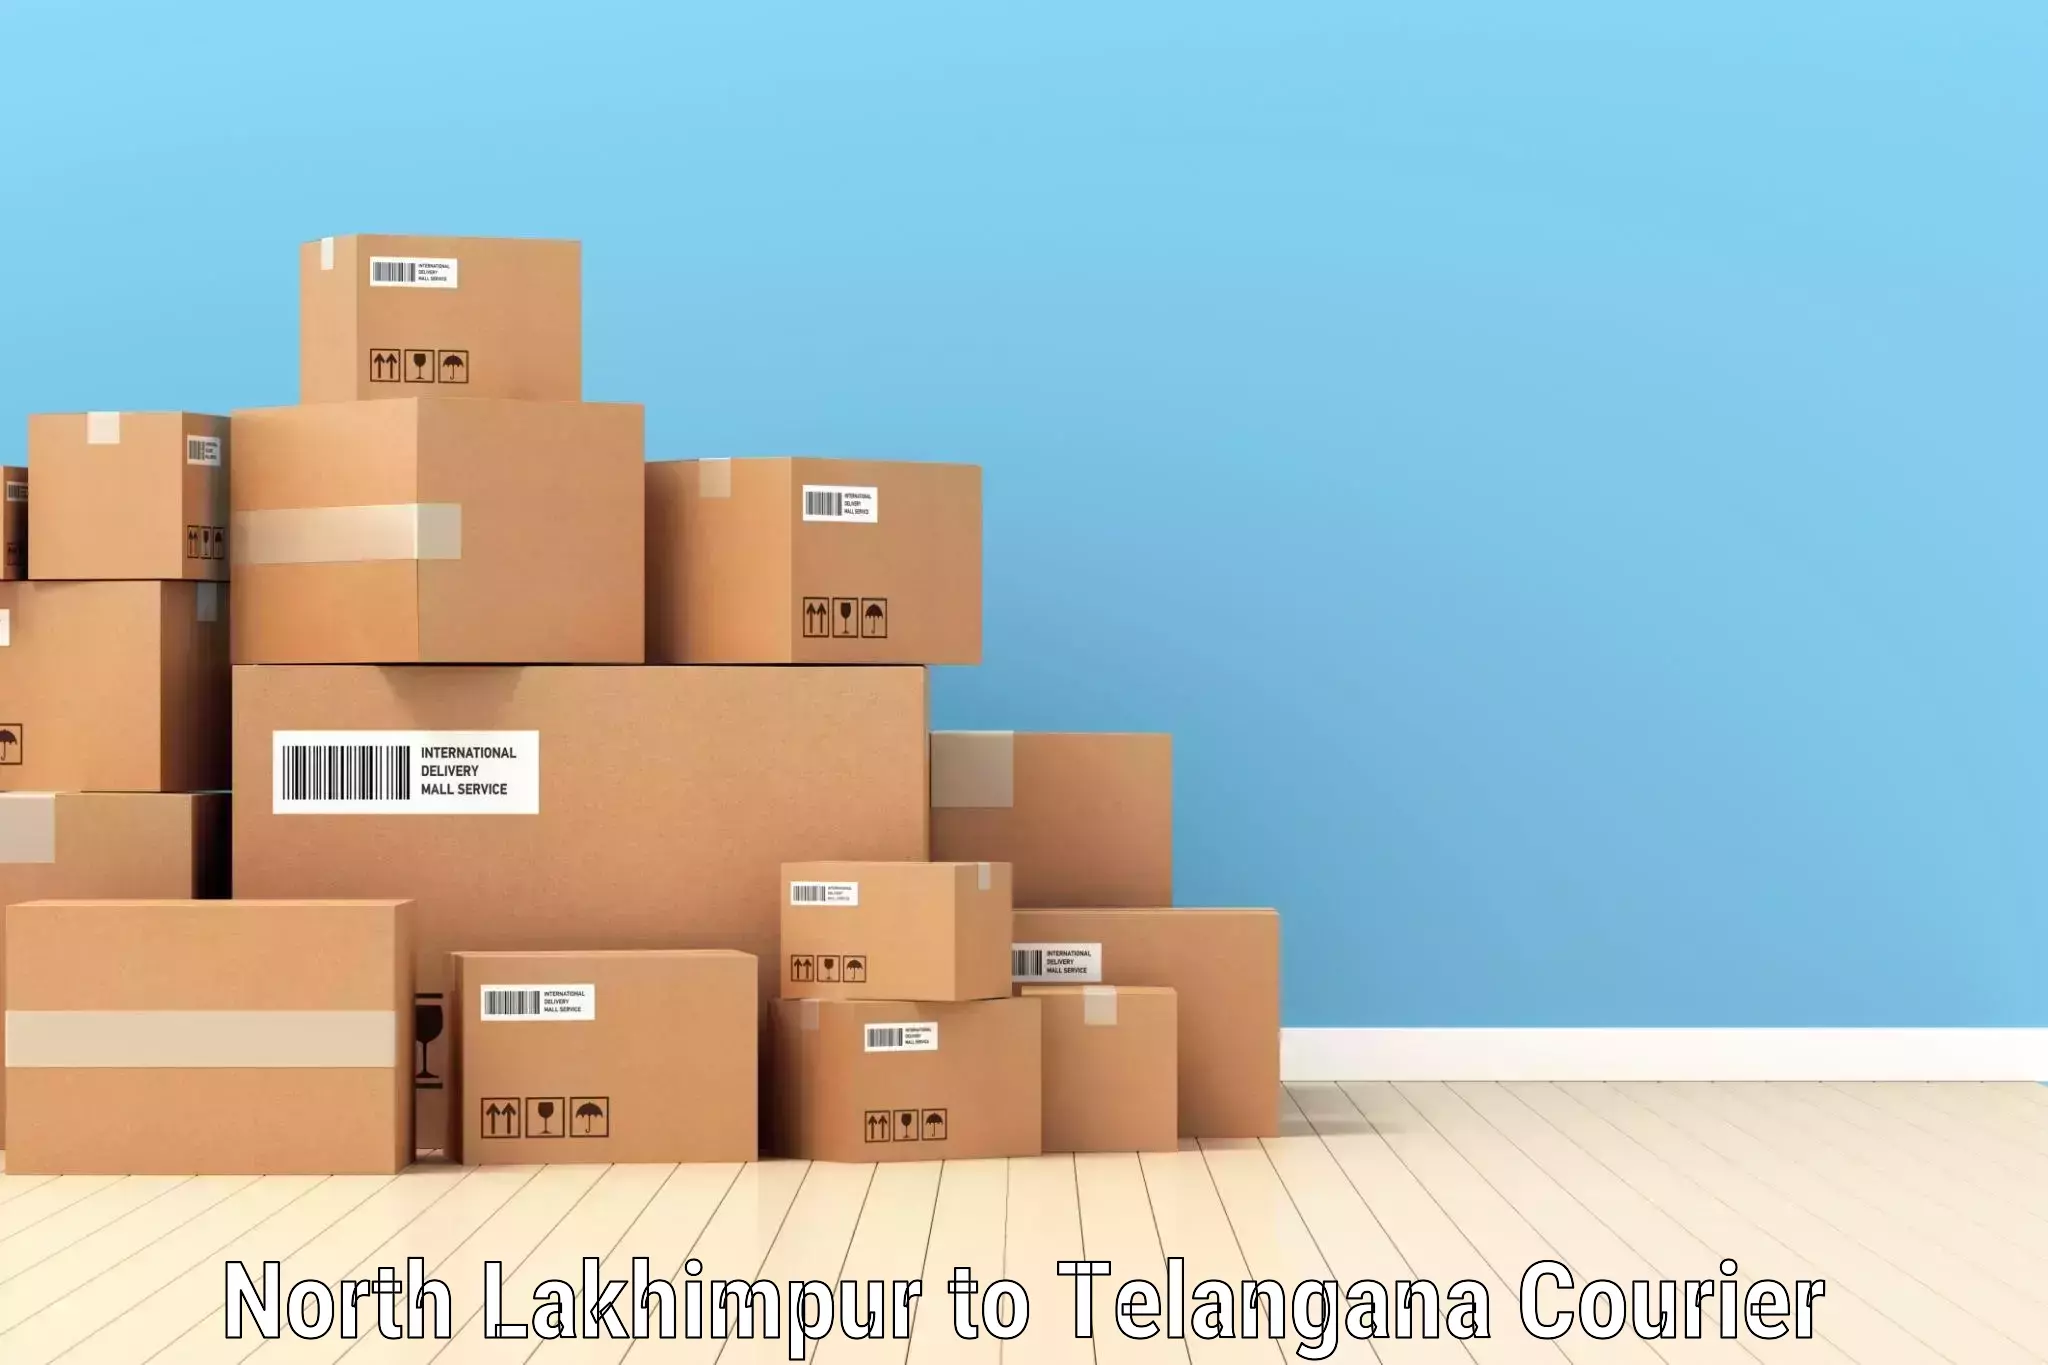 Customer-focused courier North Lakhimpur to Asifabad